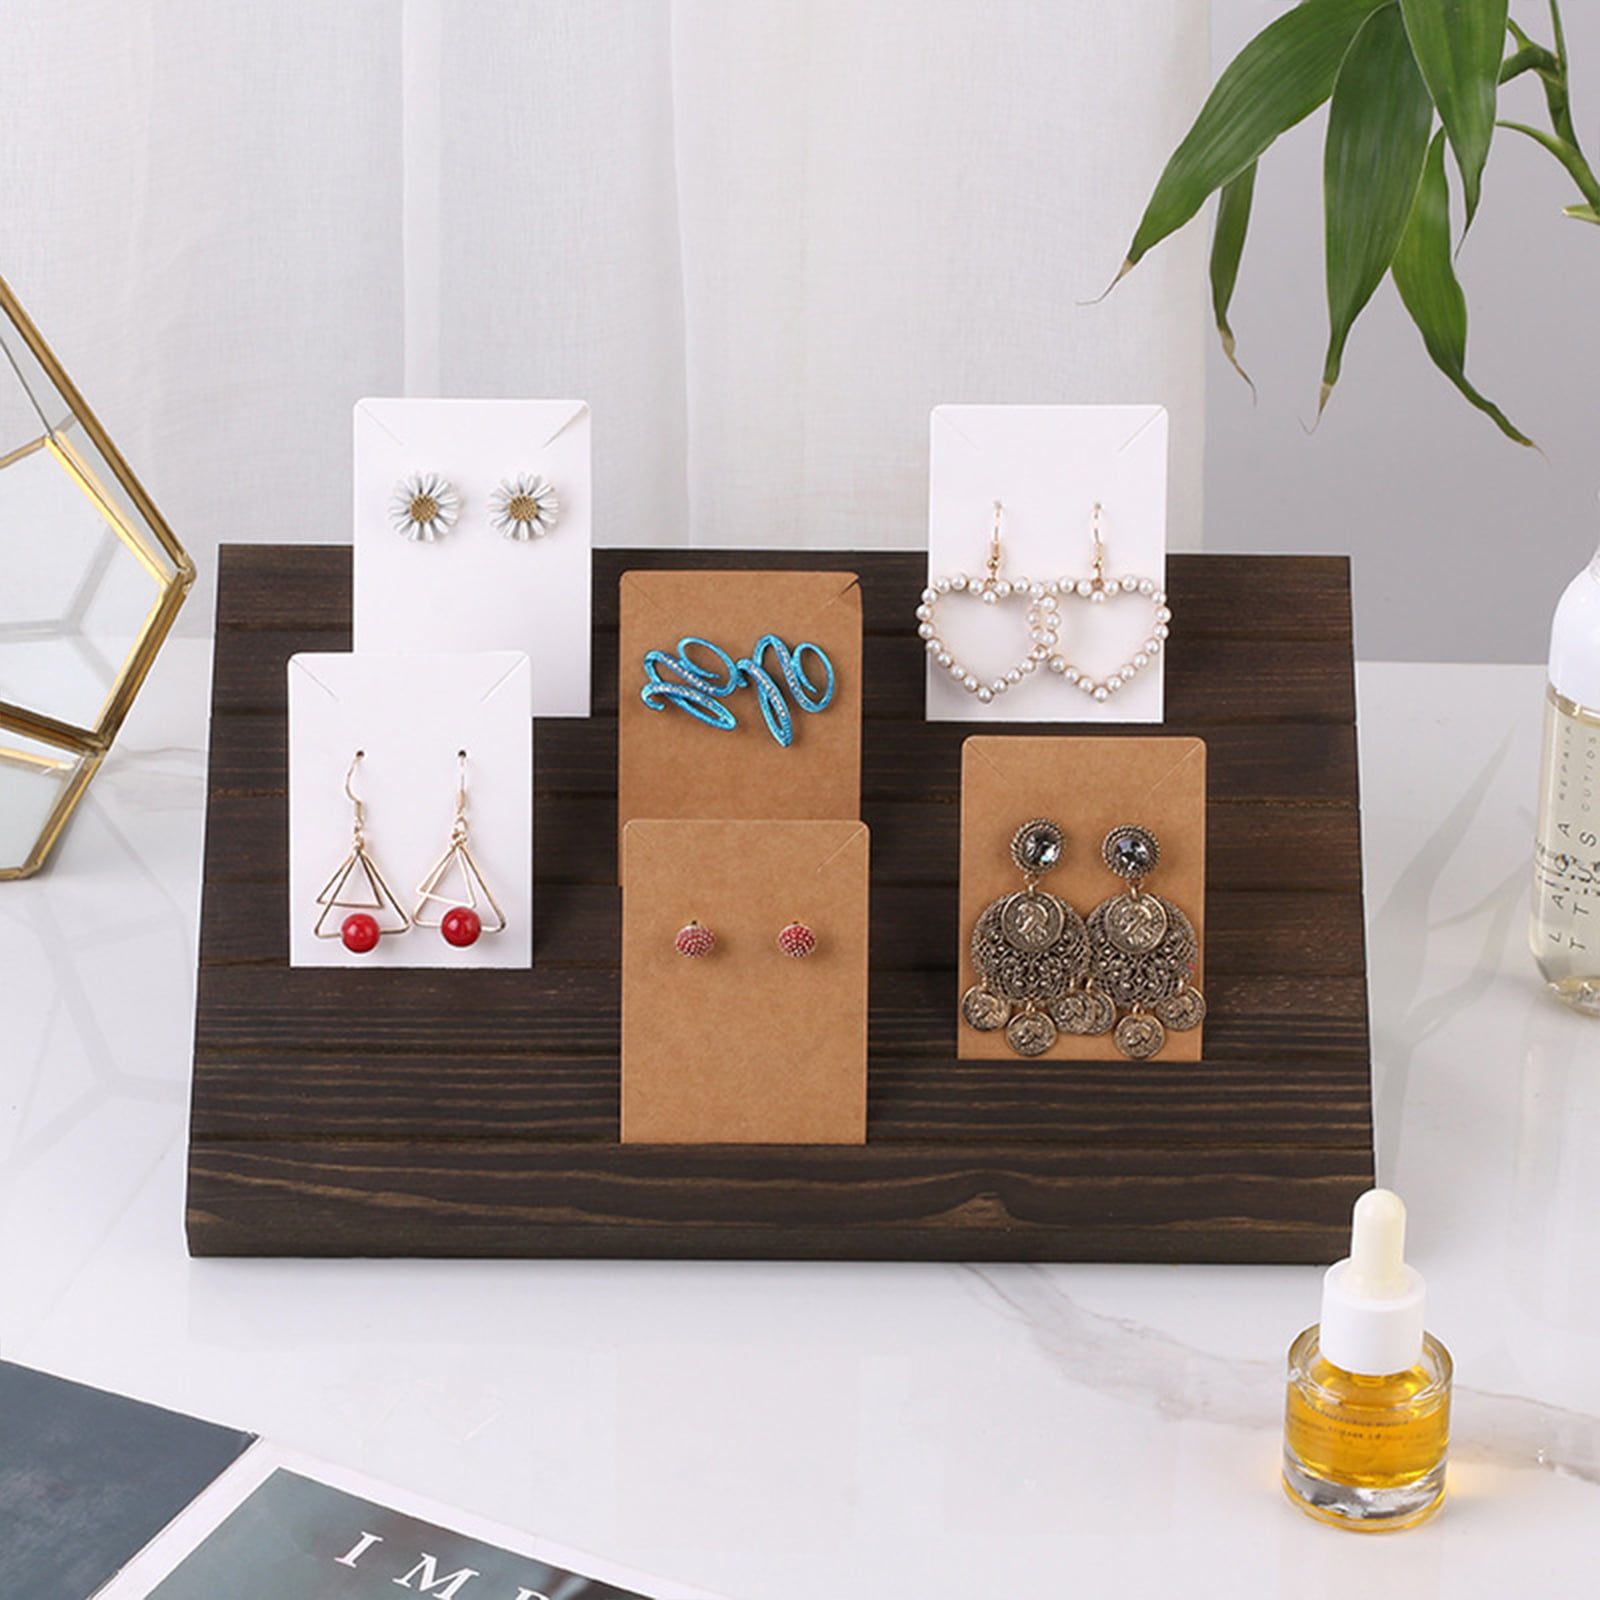 Created an earring display using a crate and nails